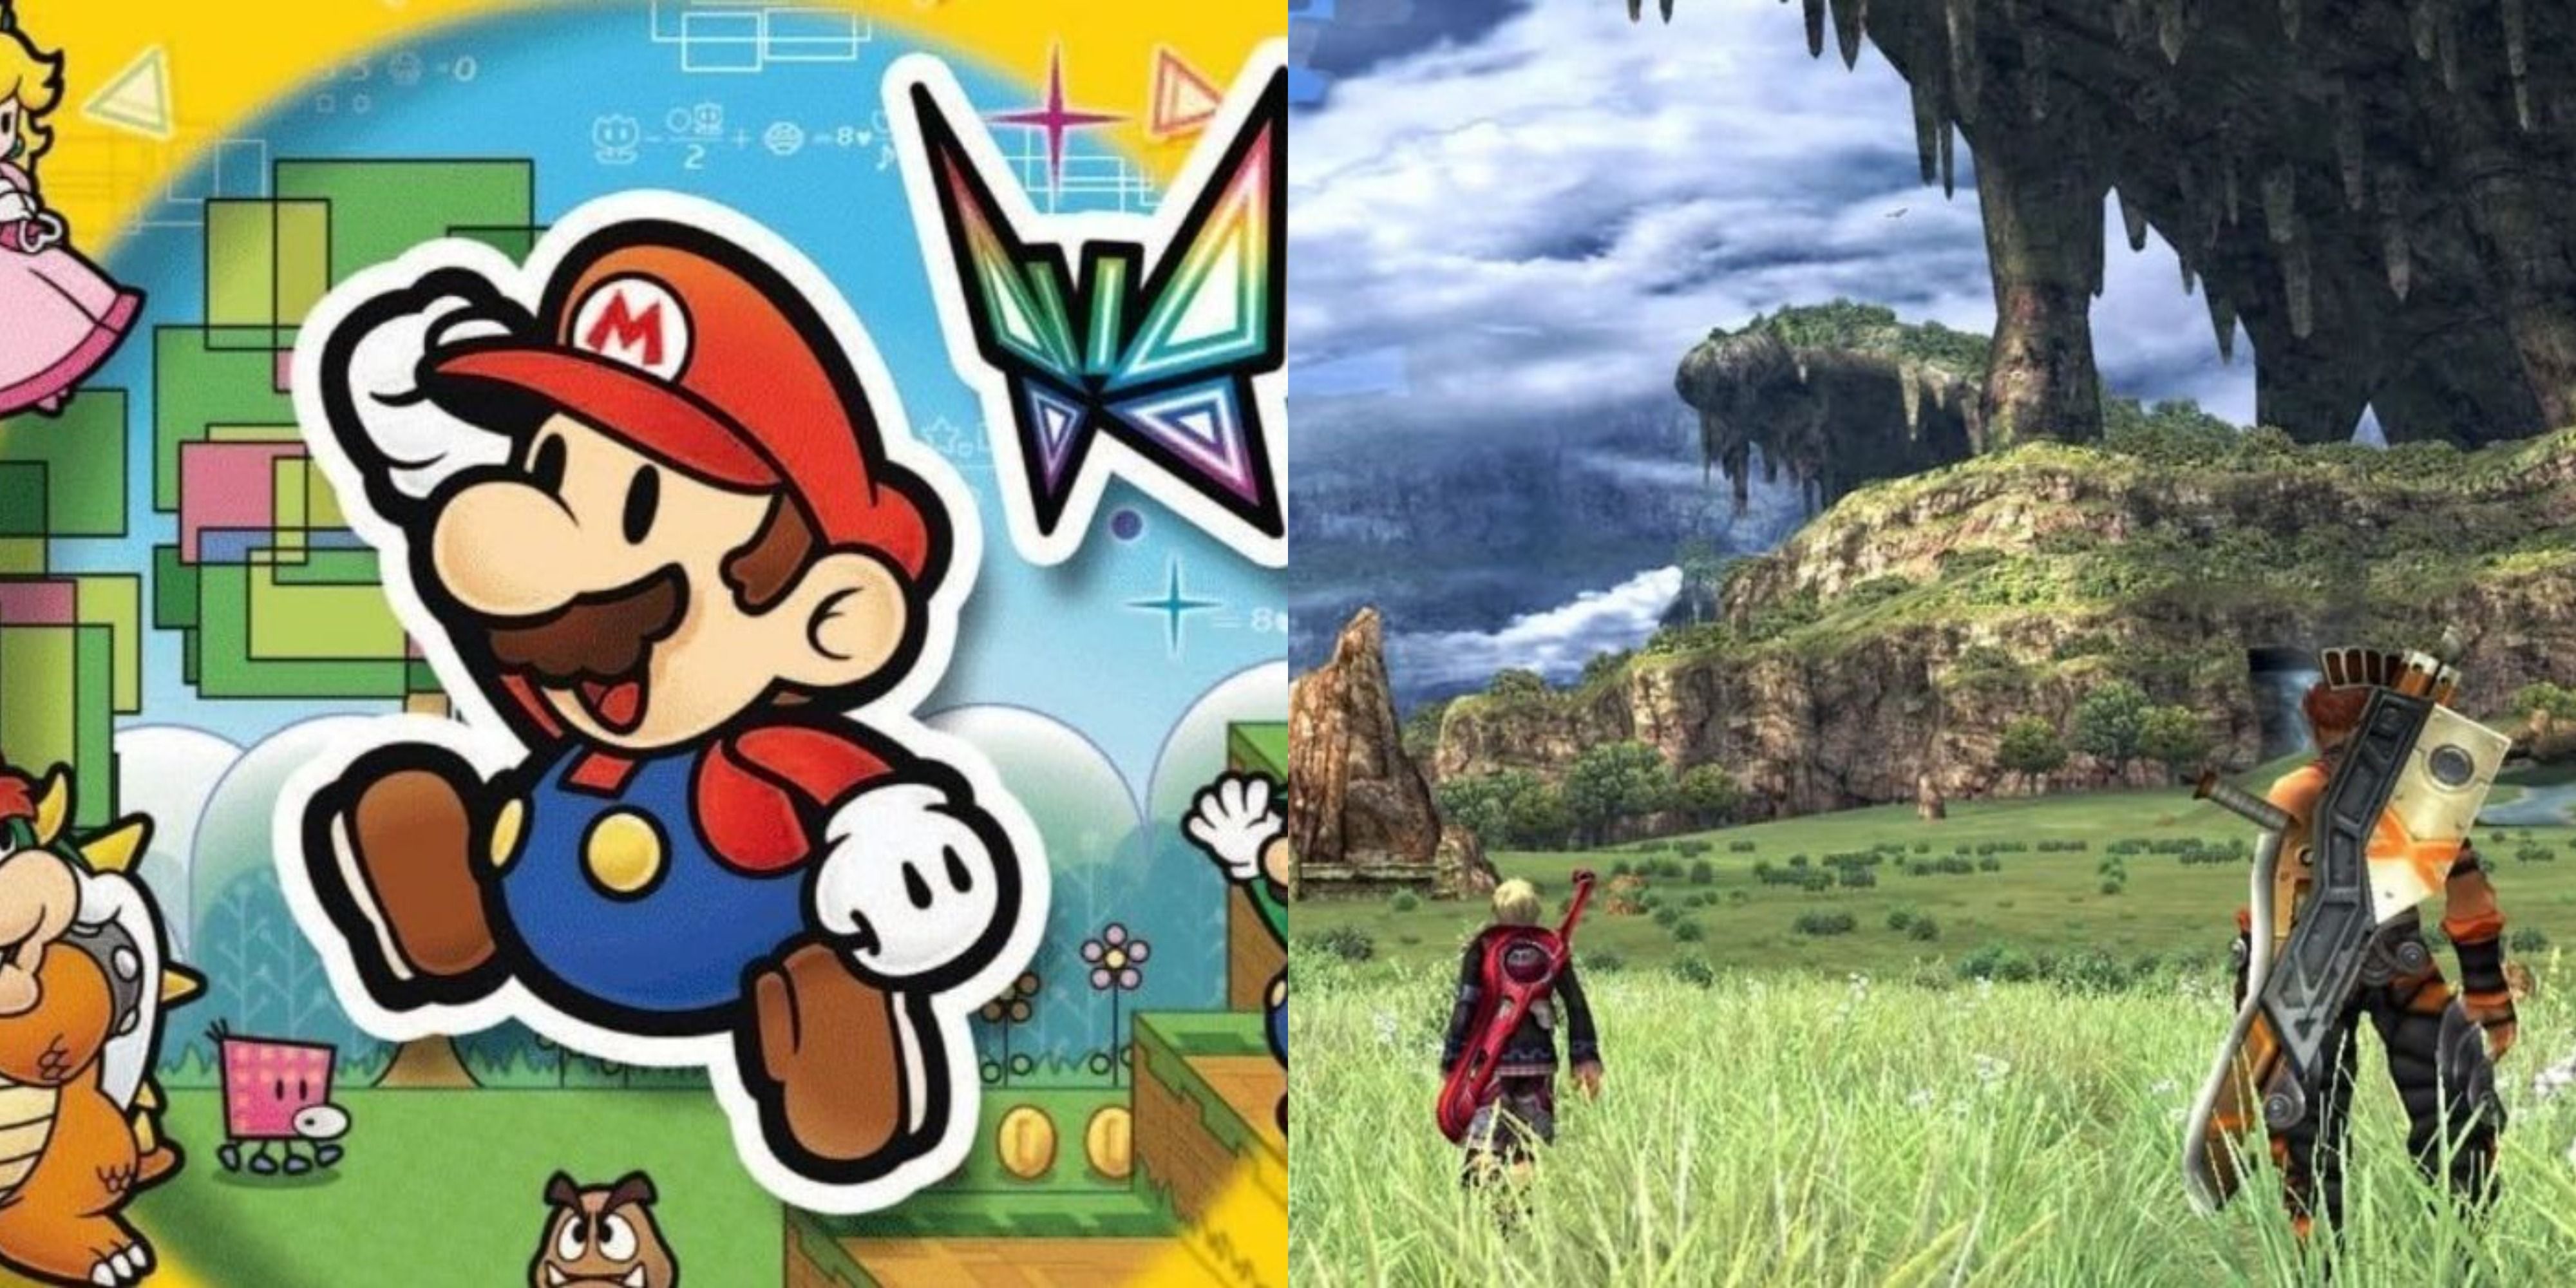 Featured image cover art for Super Paper Mario and gameplay from Xenoblade Chronicles